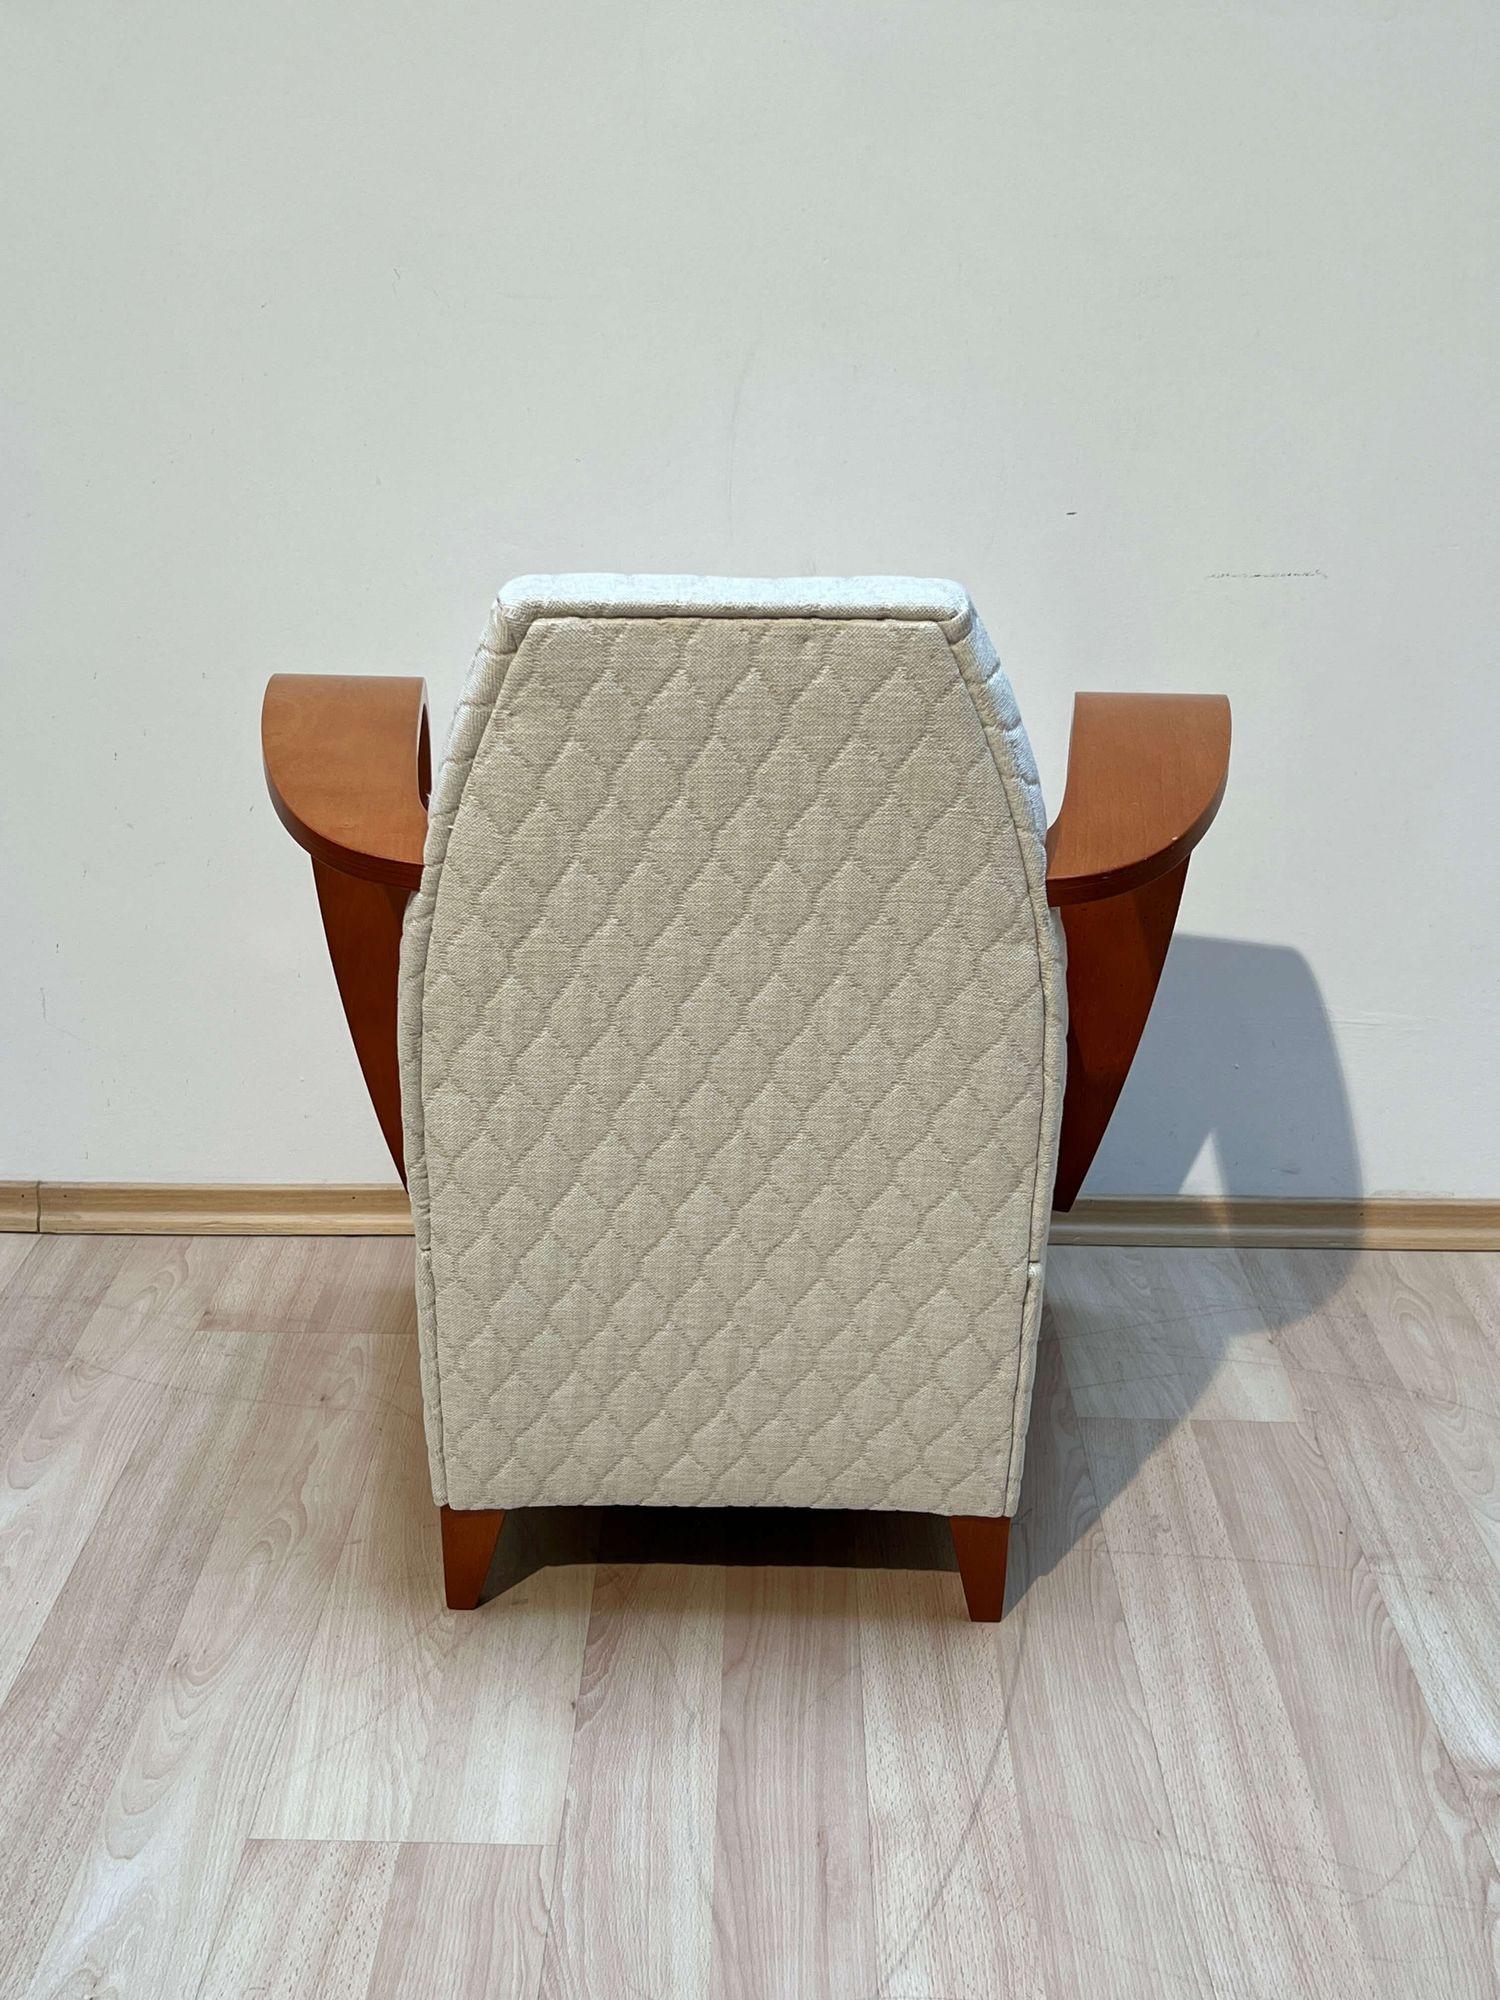 Design Arm Chair, Beech Wood, Cream-white Quilt Fabric, Spain, 1990s For Sale 2